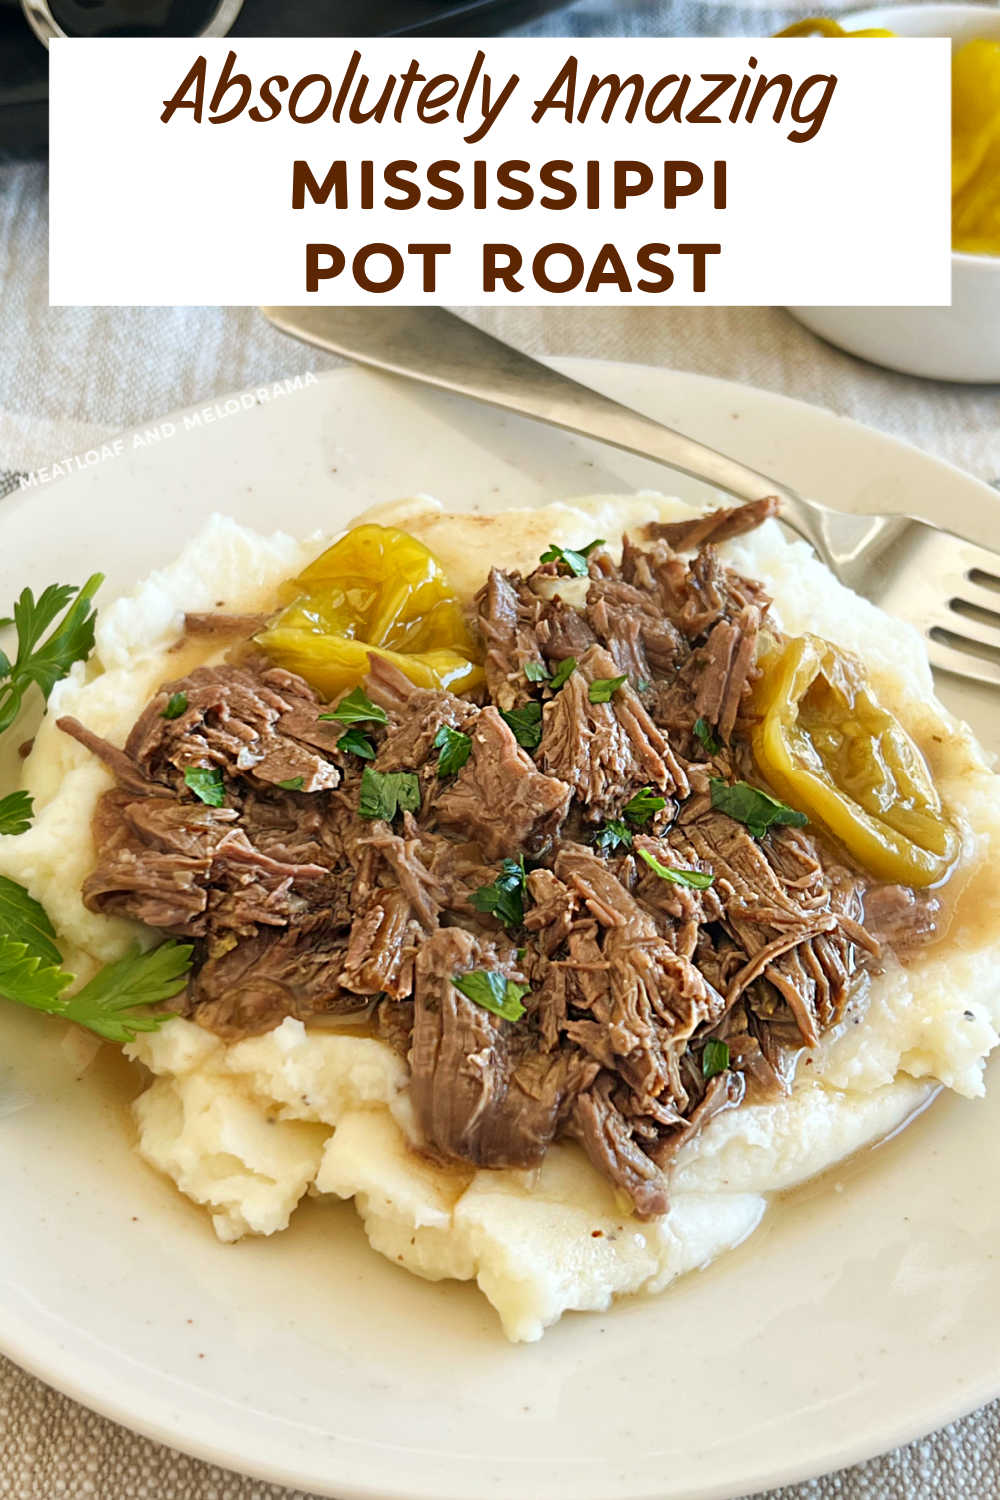 This Crock-Pot Mississippi Chuck Roast recipe uses simple ingredients to make chuck roast fork tender, flavorful and delicious. A family favorite perfect for an easy weeknight dinner or Sunday supper!  via @meamel